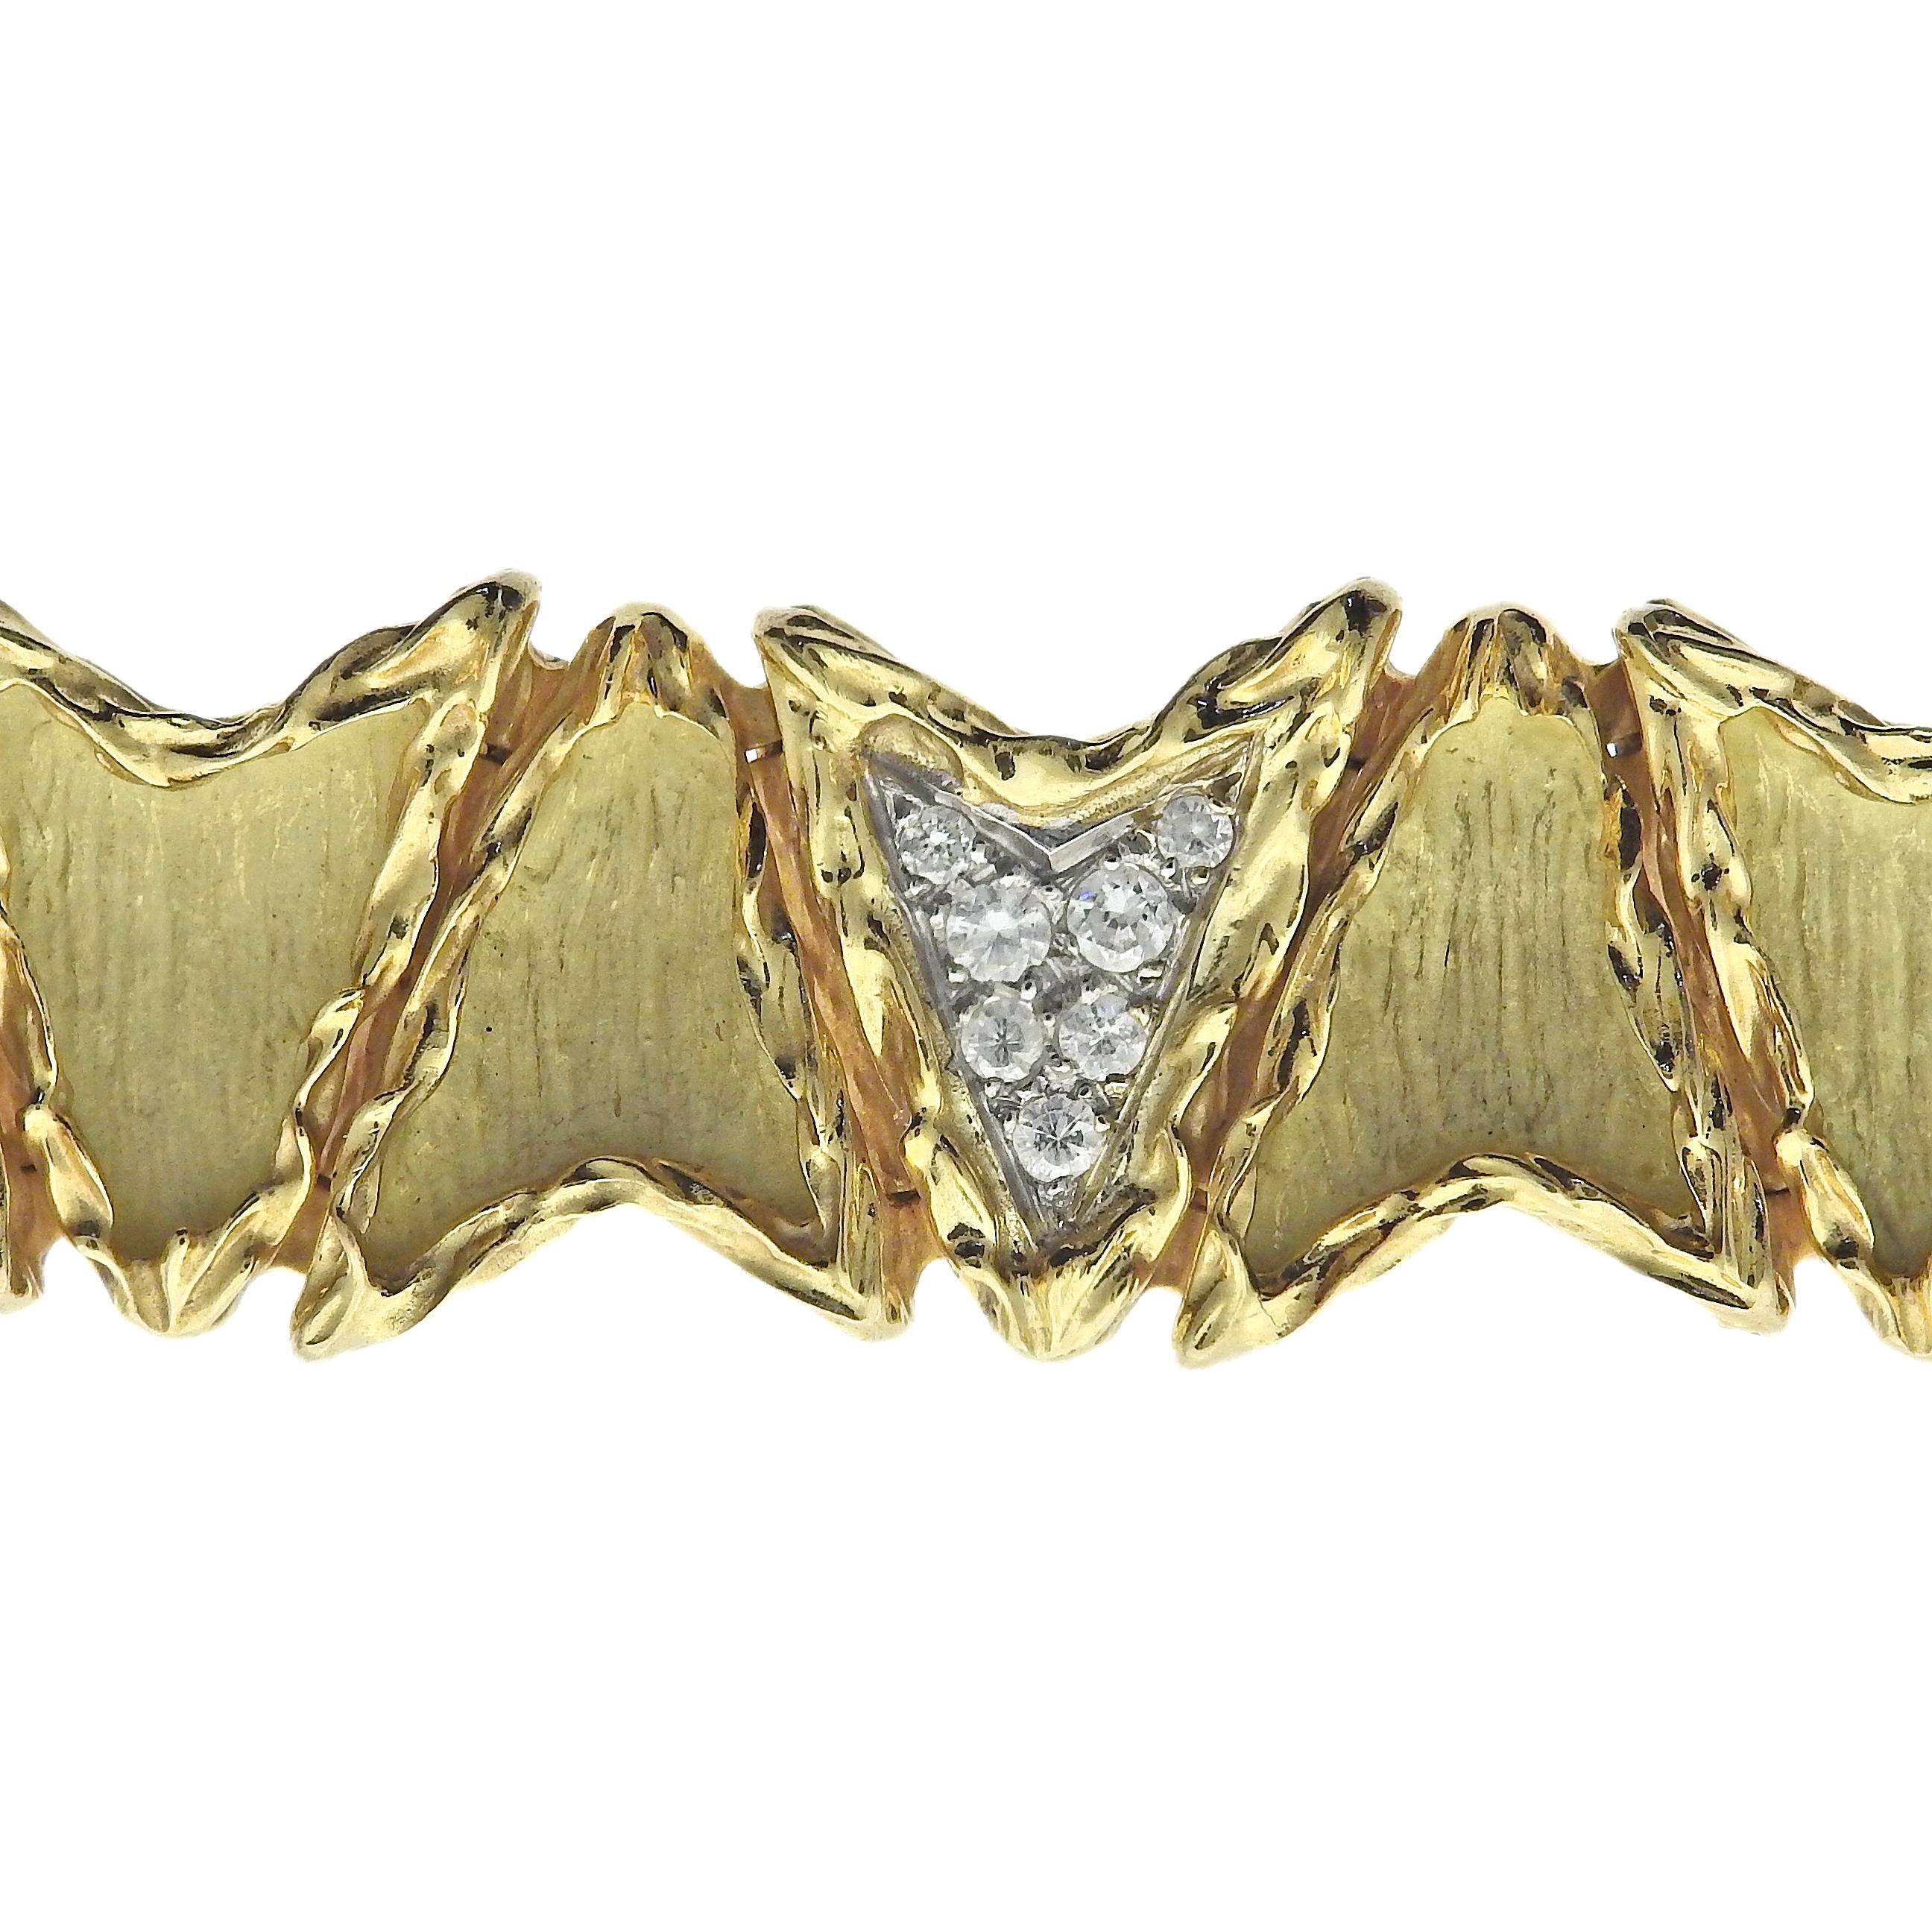 French made 18k gold line bracelet, set with approx.1.00ctw VS-SI/GH diamonds. Bracelet is 7